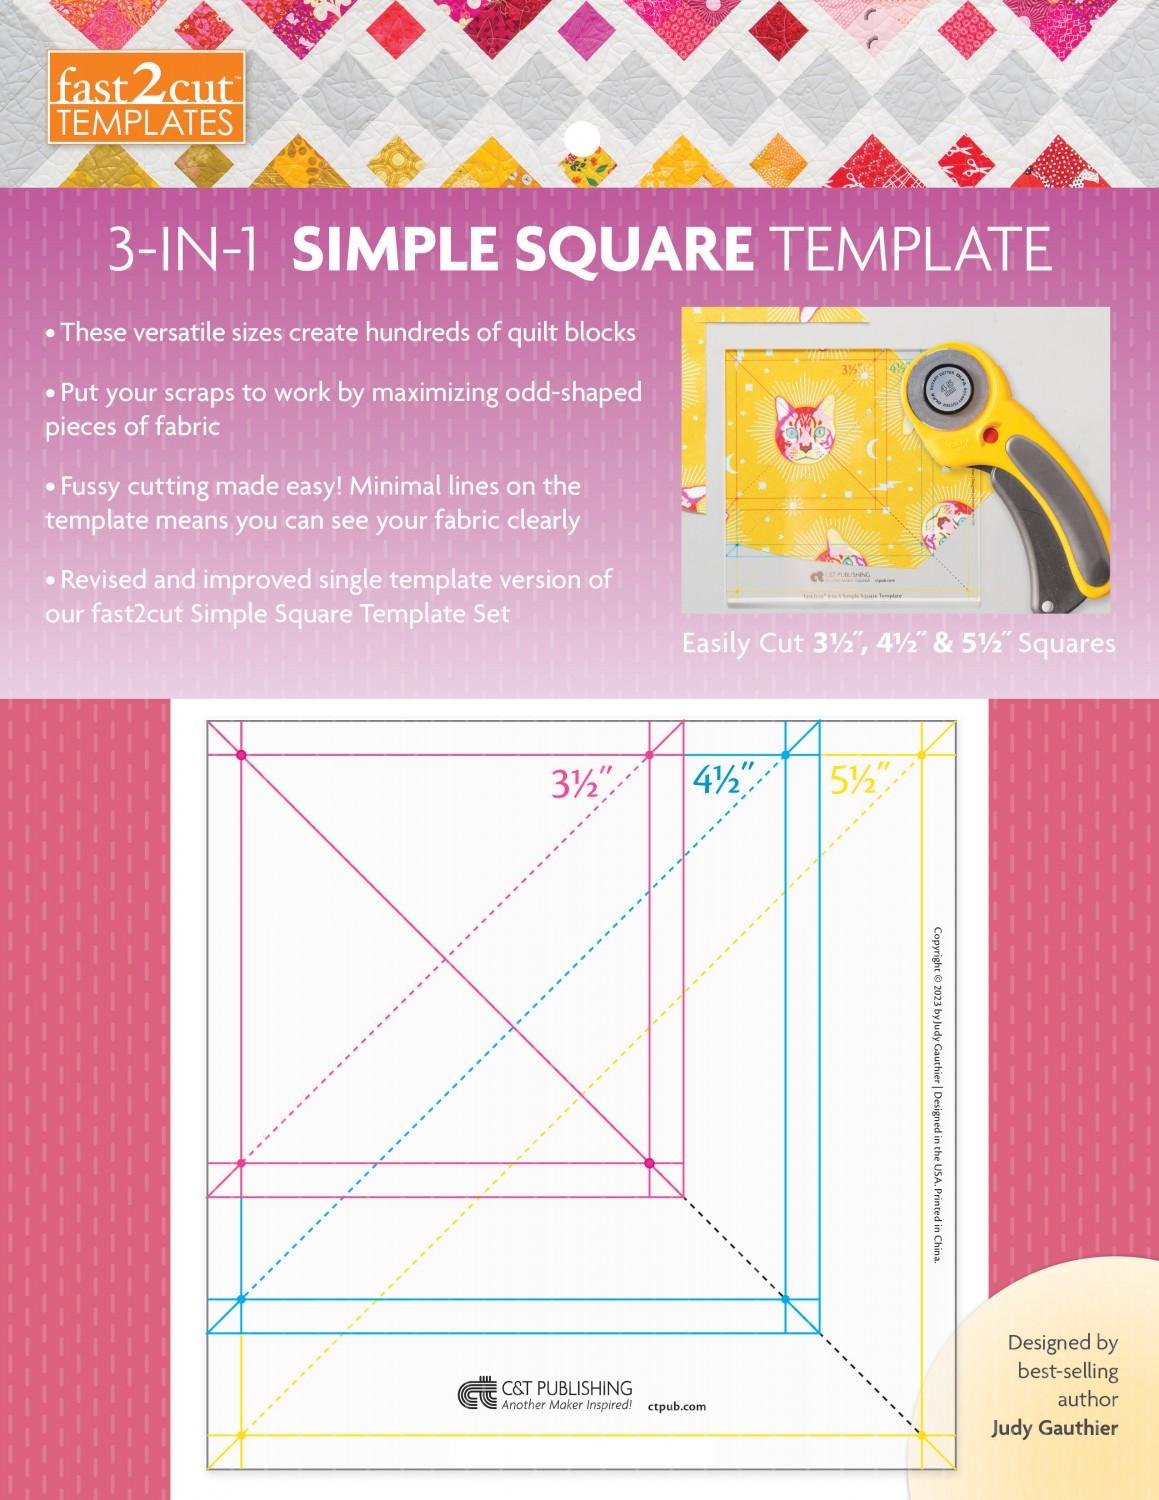 fast 2 cut 3-in-1 Simple Square Template # 20517